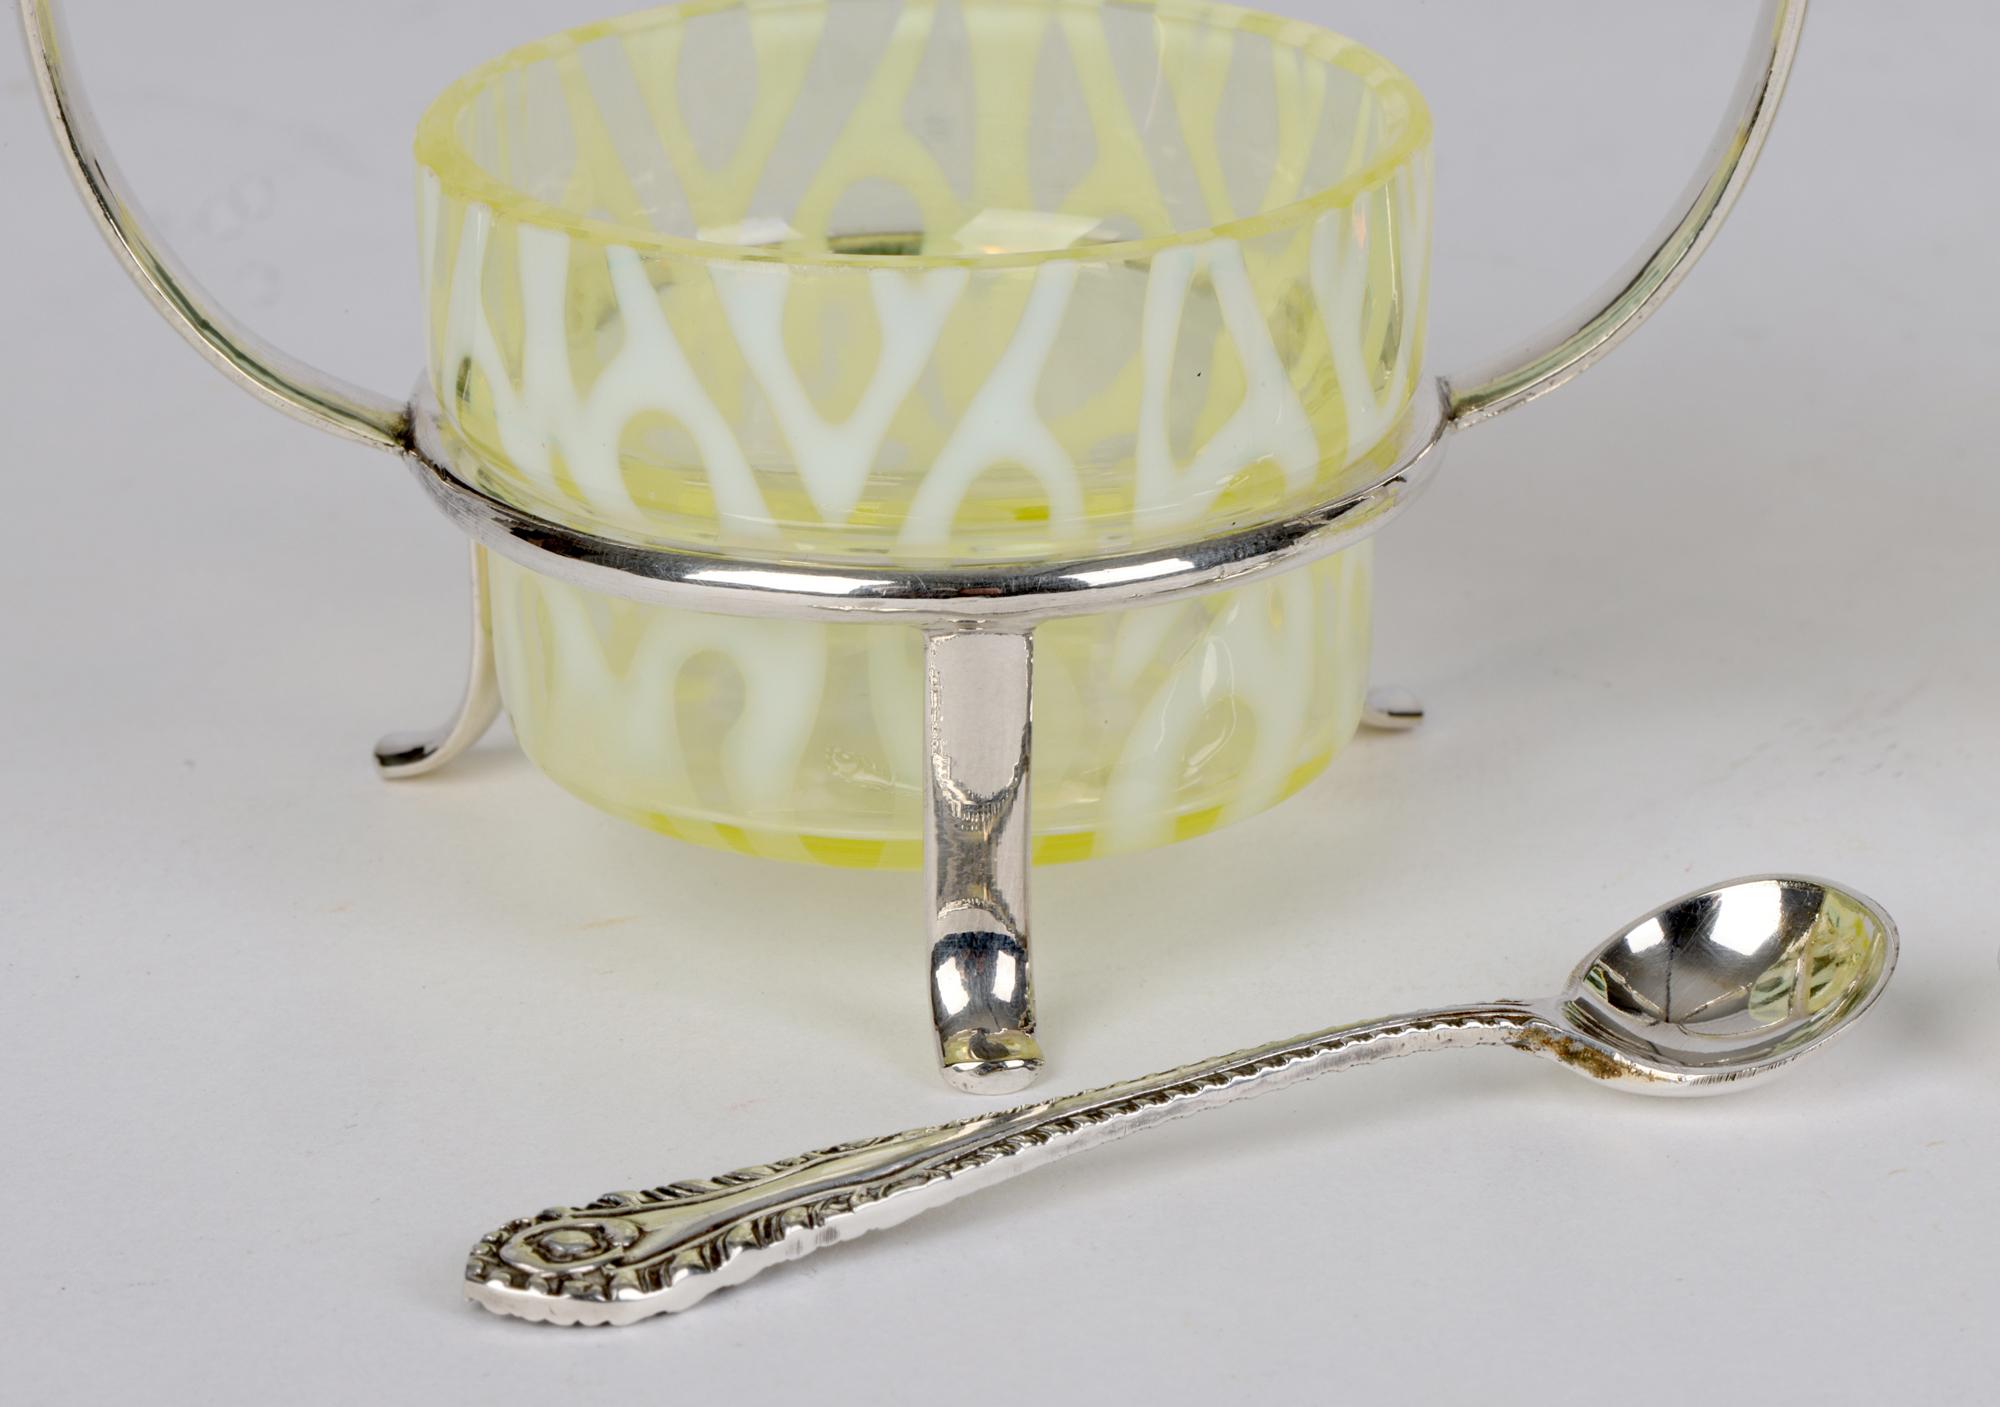 A stunning pair Art Nouveau silver plated open salts with original Powell opalescent glass liners by Michael Hunter & Son of Sheffield and dating from around 1900. The uranium yellow glass salts sit within a silver-plated frame mounted on three legs